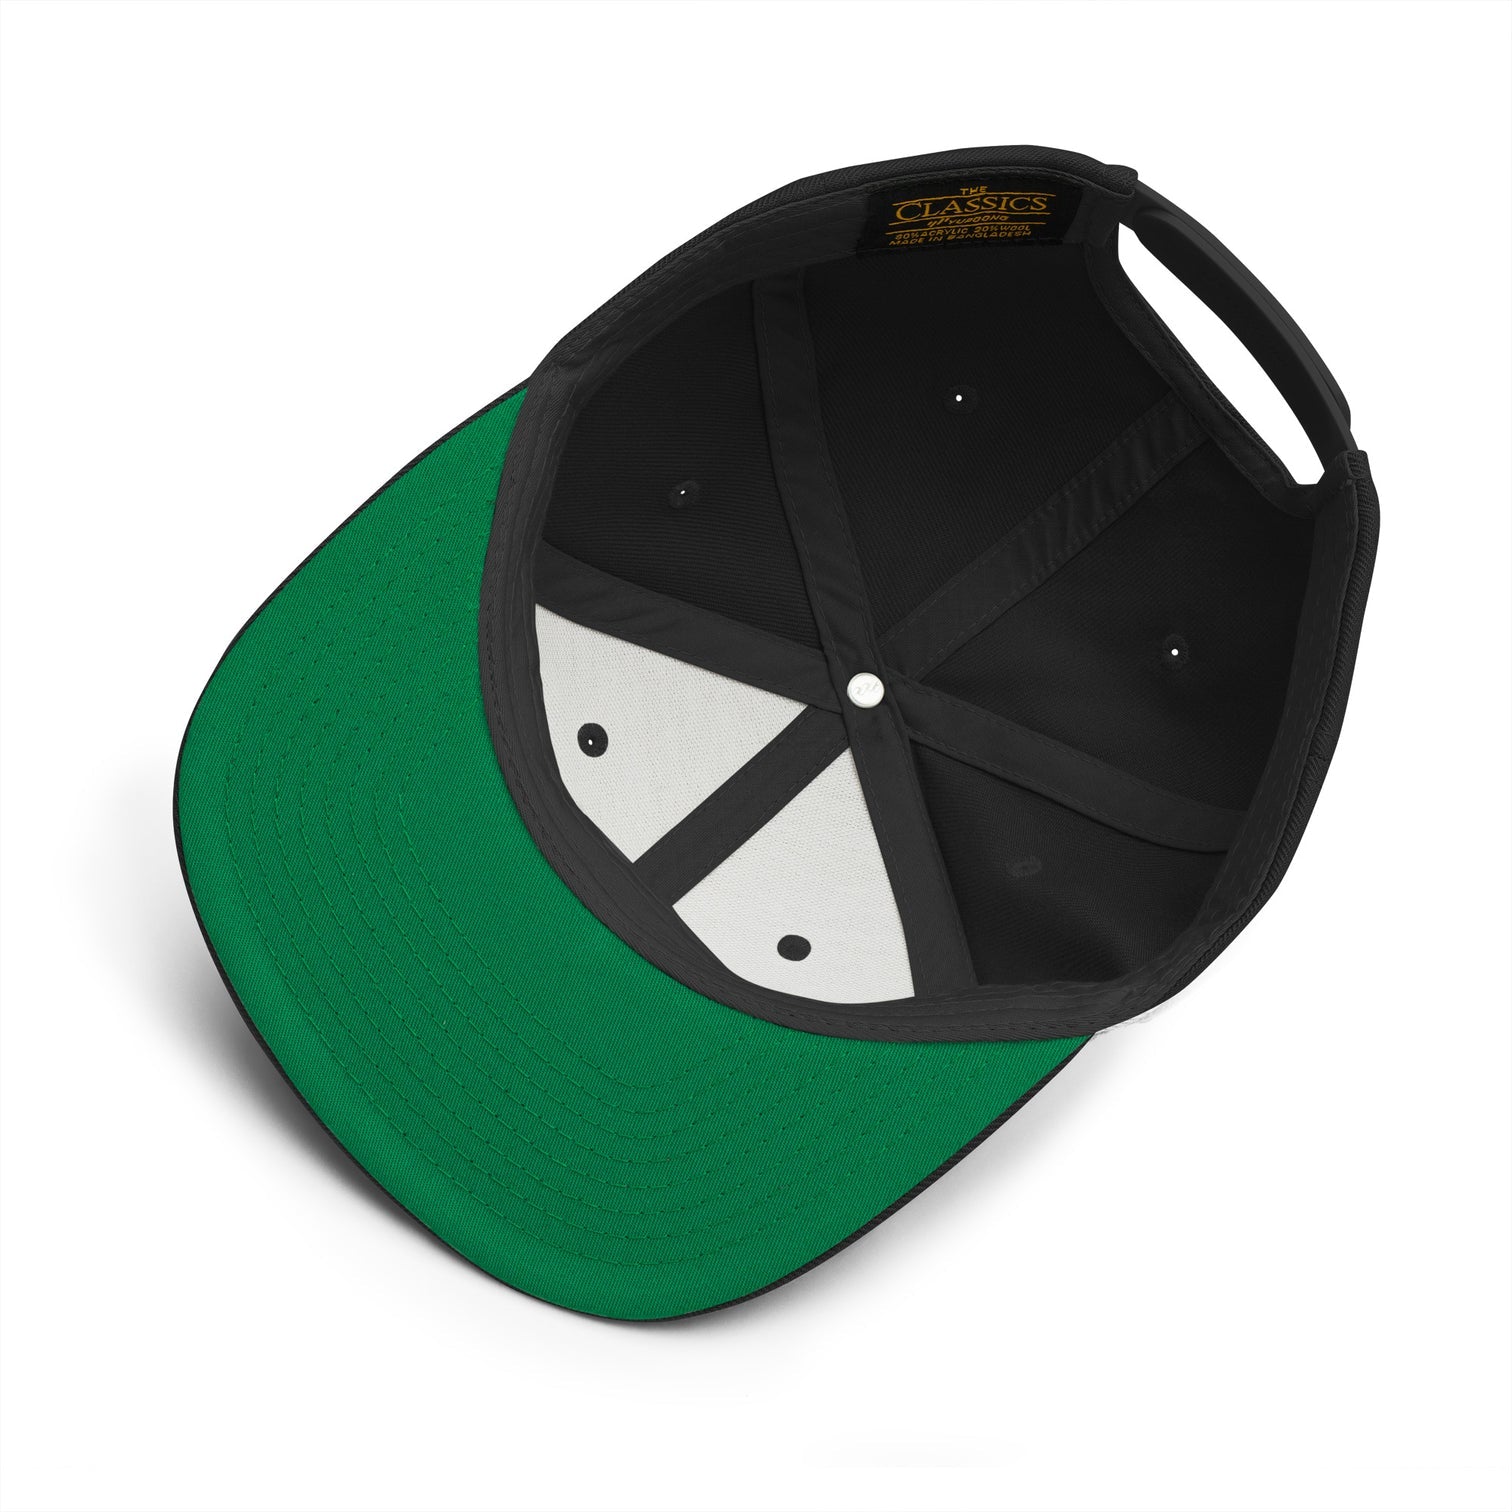 Black OG snapback cap baseball hat displayed upside down to show that the bottom of the bill is green